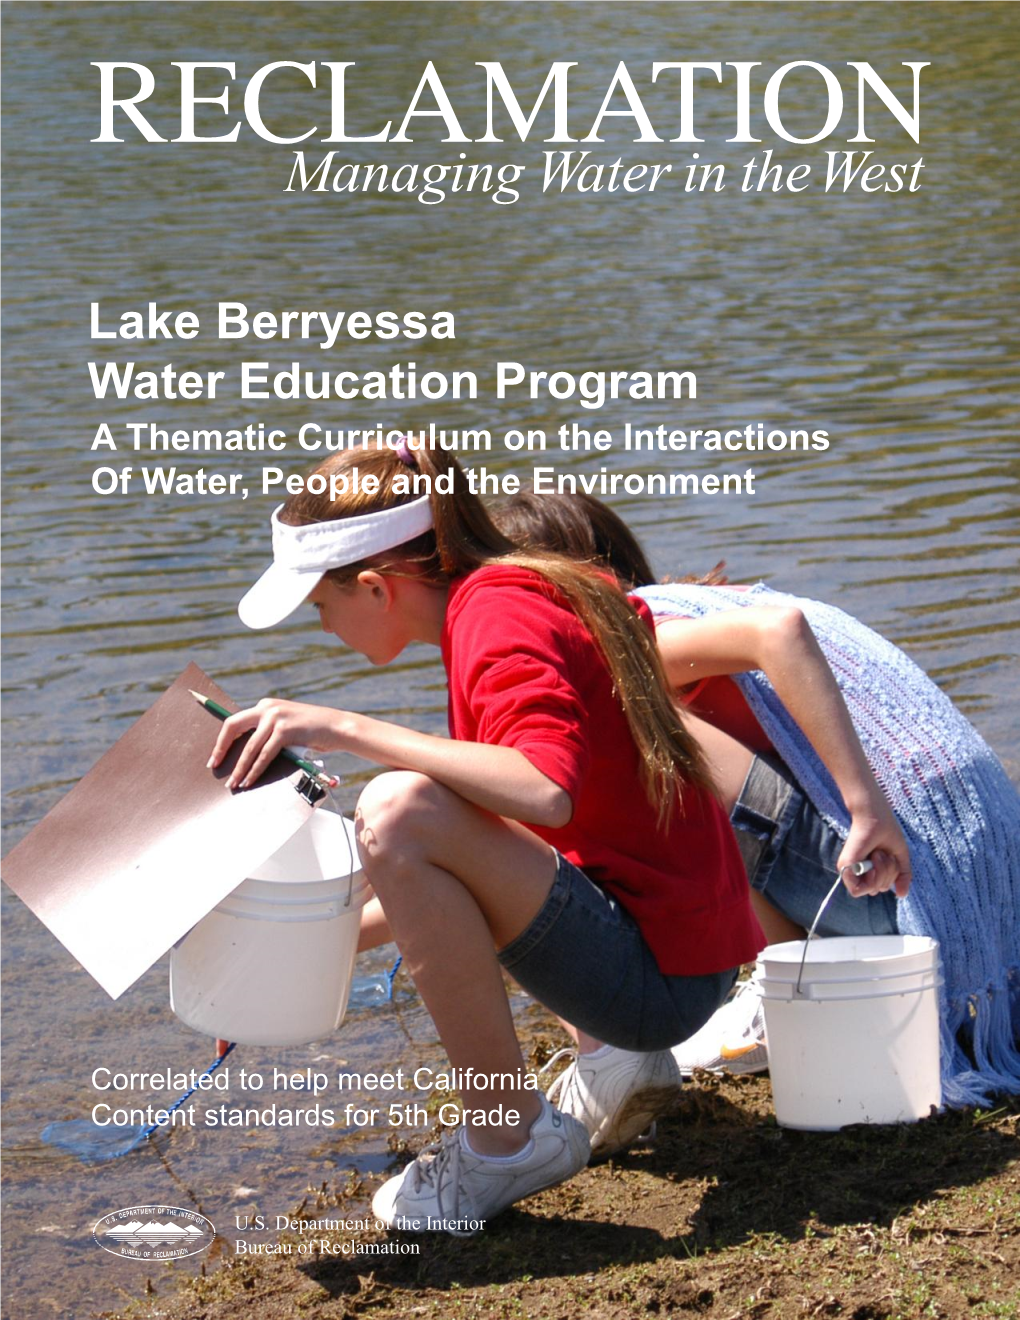 Lake Berryessa Water Education Program a Thematic Curriculum on the Interactions of Water, People and the Environment